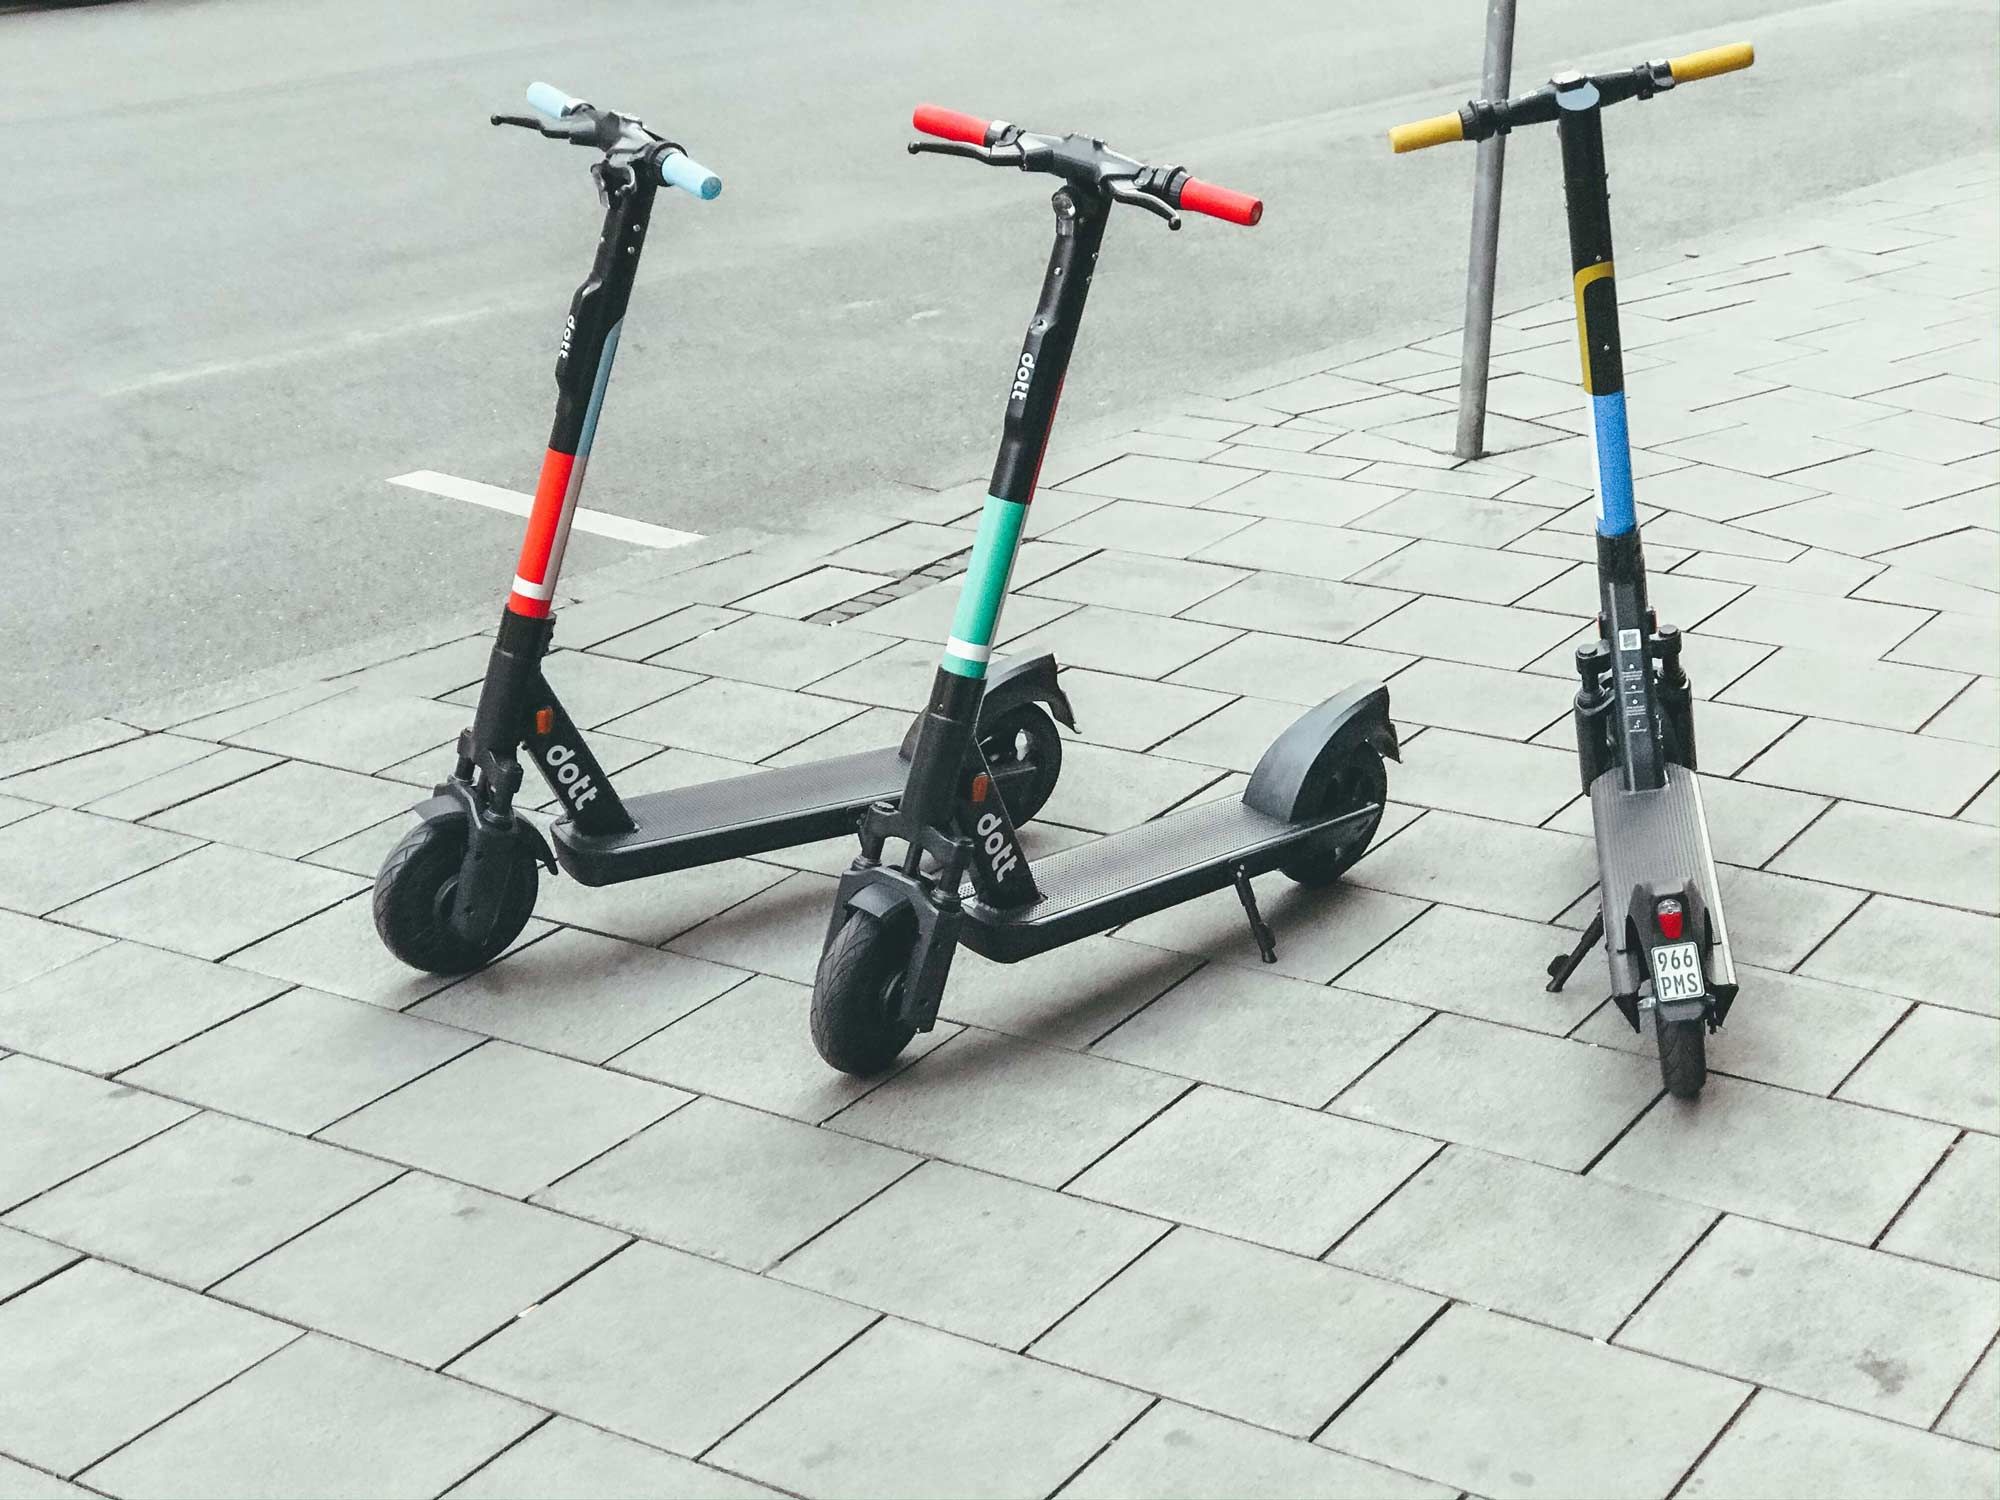 Three electric scooters on a sidewalk next to a street